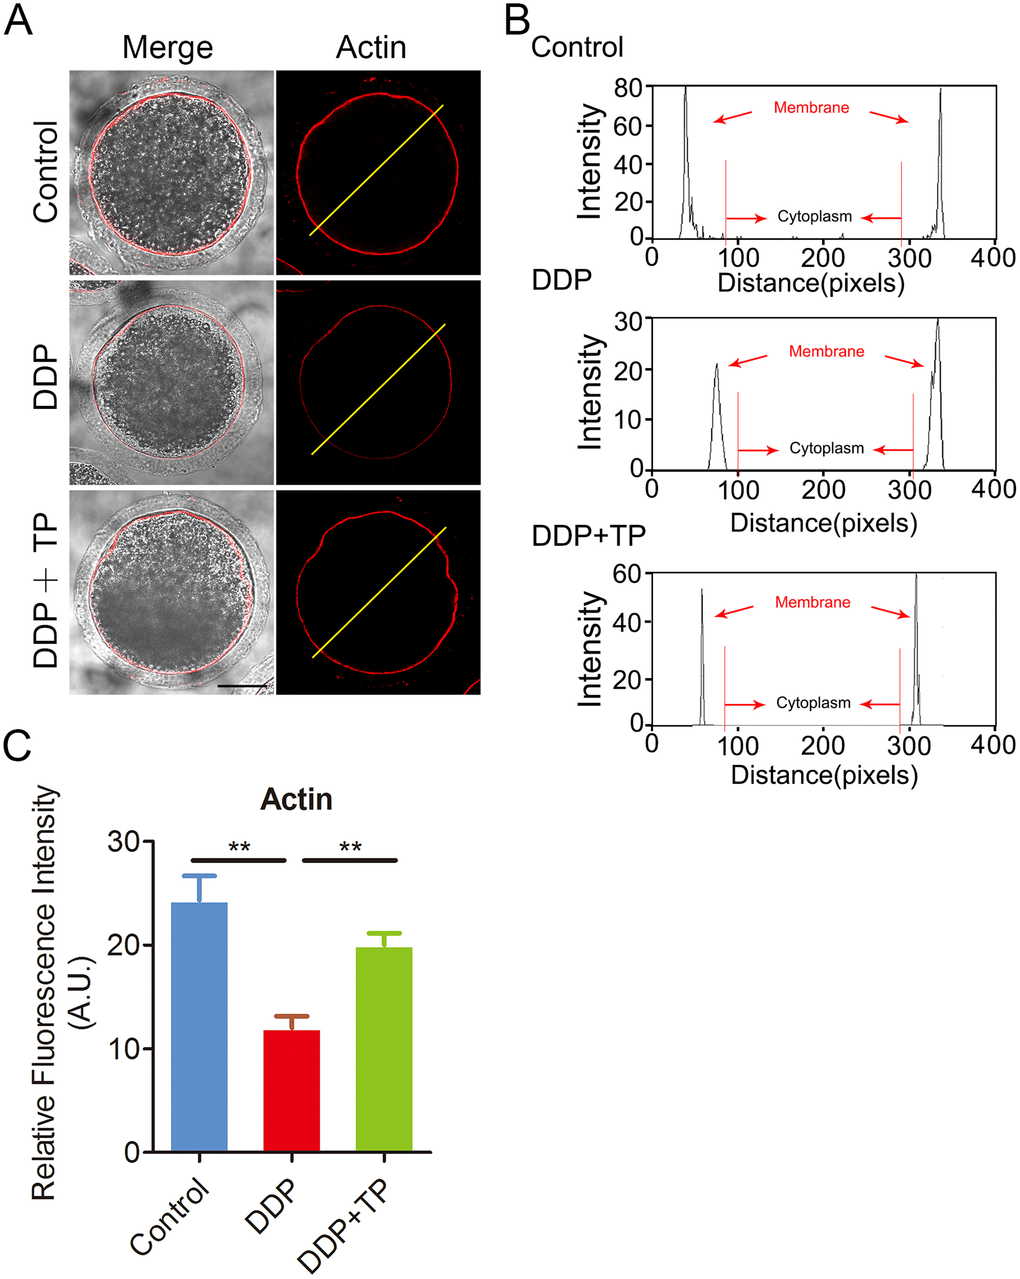 Effects of TP on the actin polymerization in DDP-exposed porcine oocytes. (A) Representative images of actin filaments in control, DDP-exposed and TP-supplemented oocytes. Scale bar, 30 μm. (B) Right graphs show fluorescence intensity profiling of phalloidin in oocytes. Lines were drawn through the oocytes, and pixel intensities were quantified along the lines. (C) The fluorescence intensity of actin signals was measured in control, DDP-exposed and TP-supplemented oocytes. Data were presented as mean percentage (mean ± SEM) of at least three independent experiments. **P 